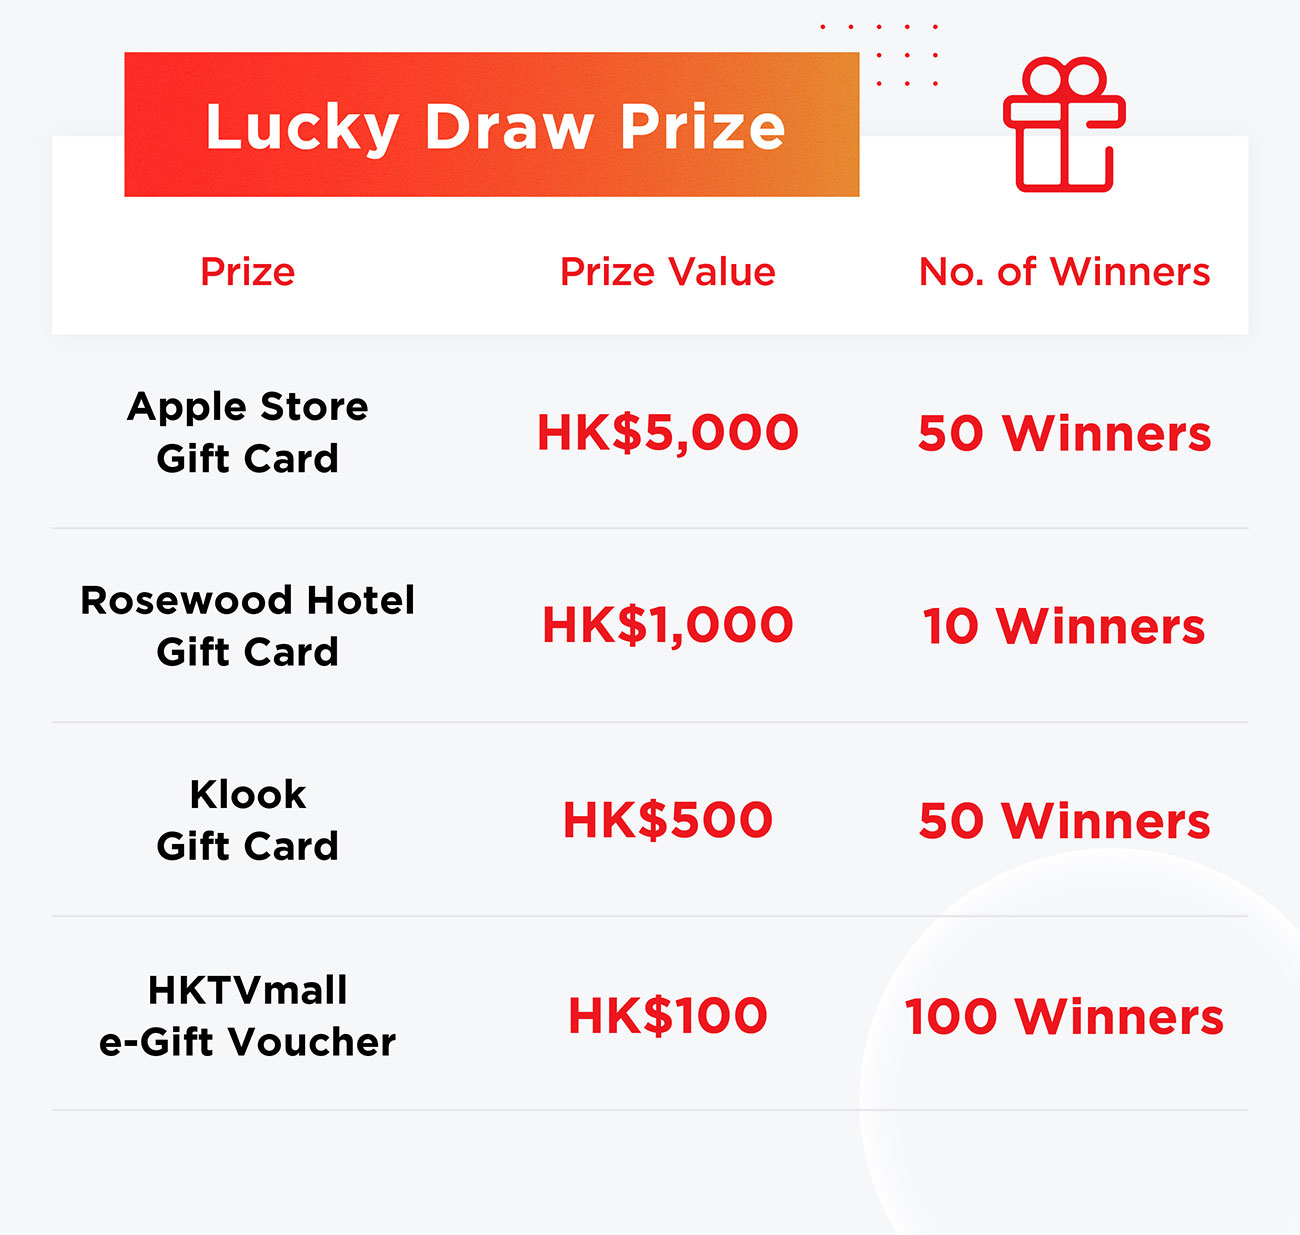 「Investment and Insurance」Lucky Draw